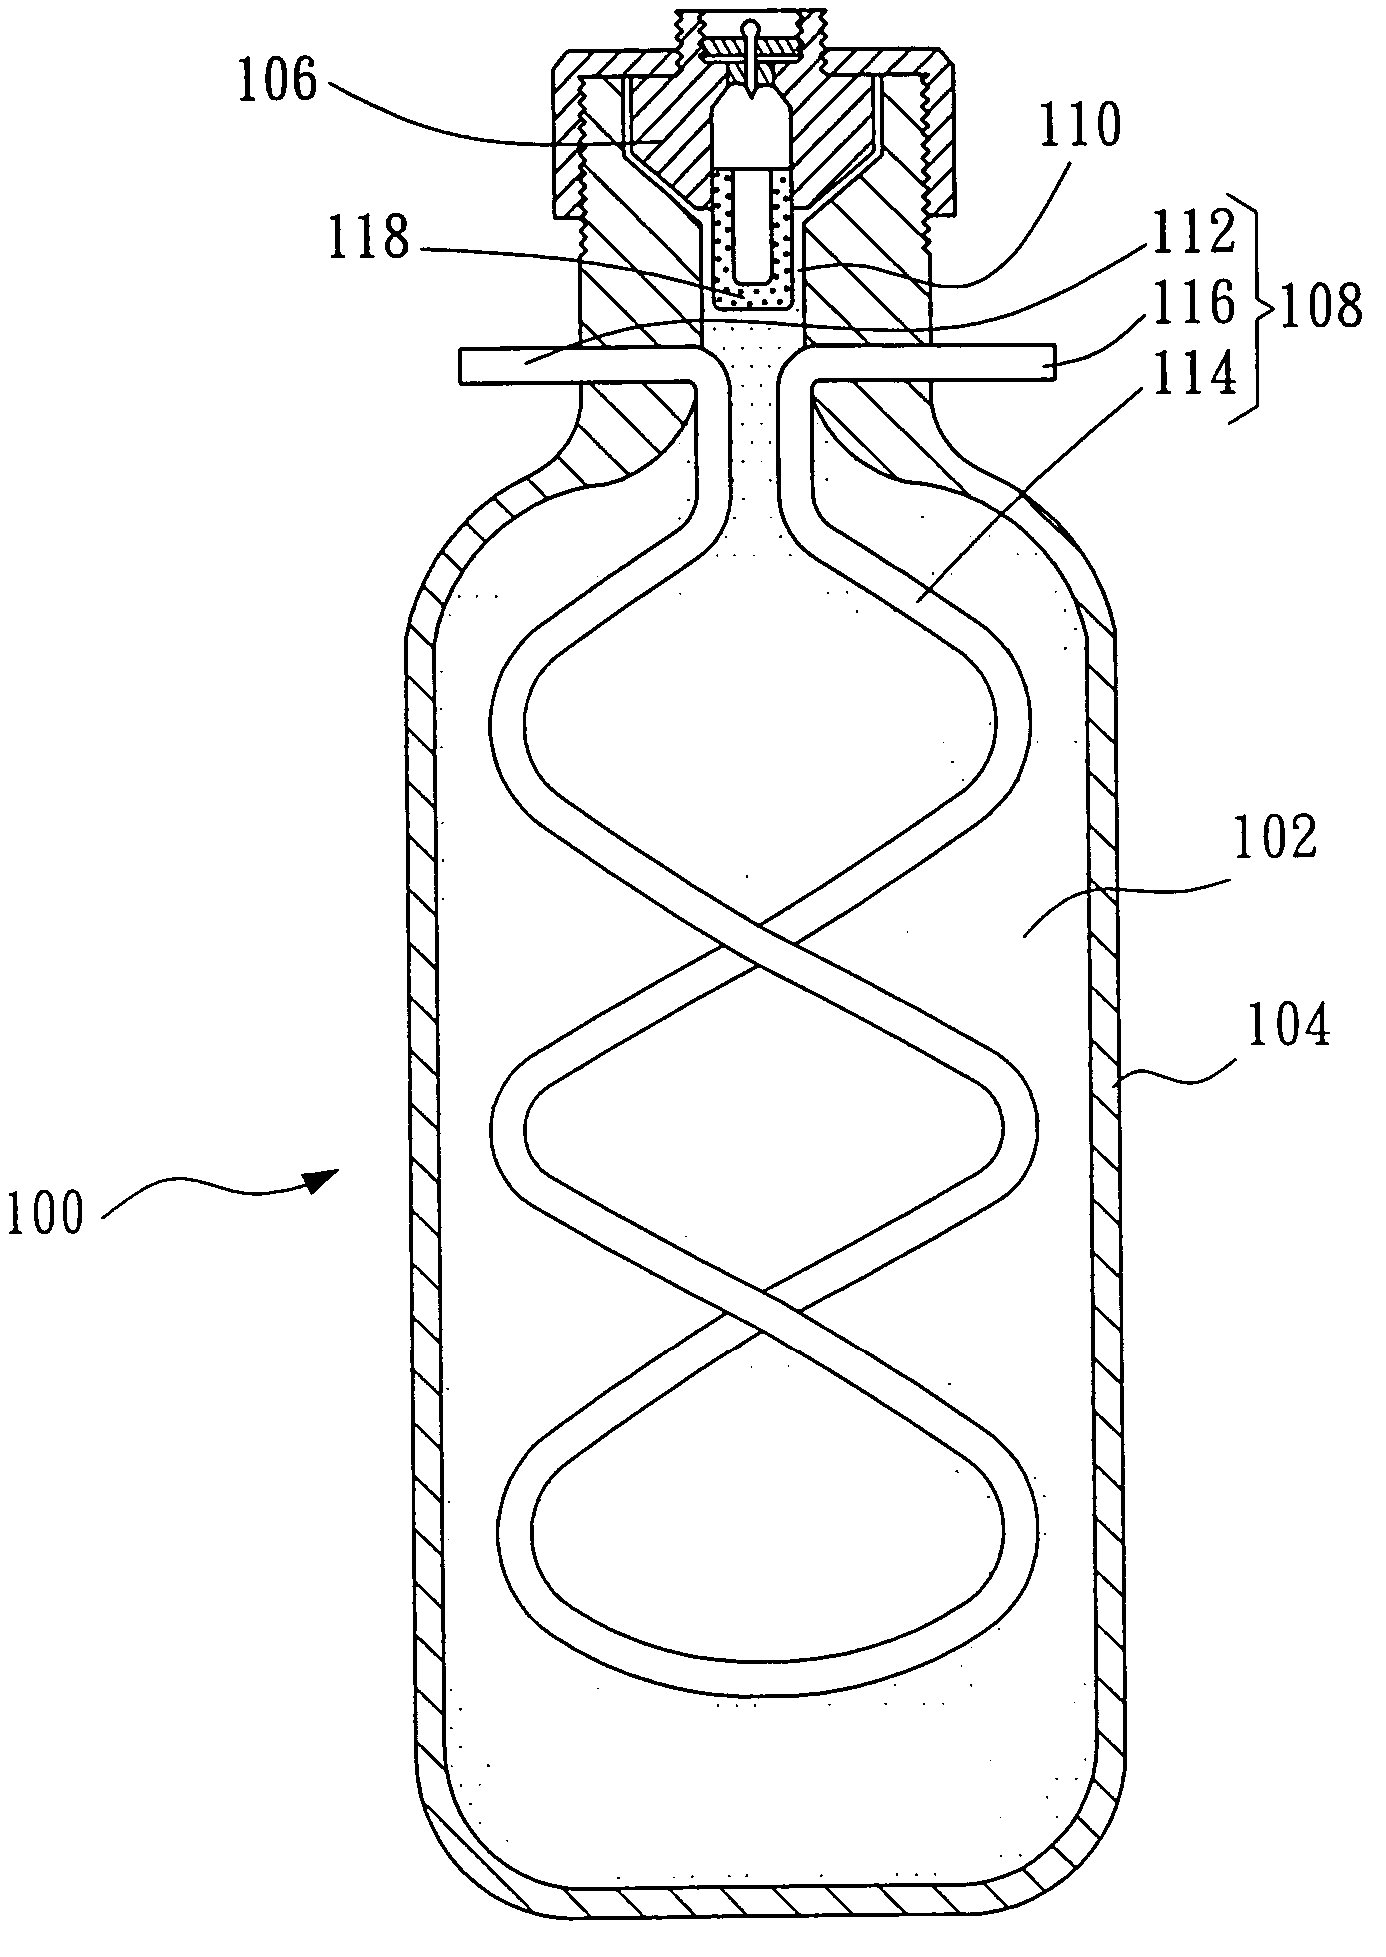 Metal hydride canister apparatus